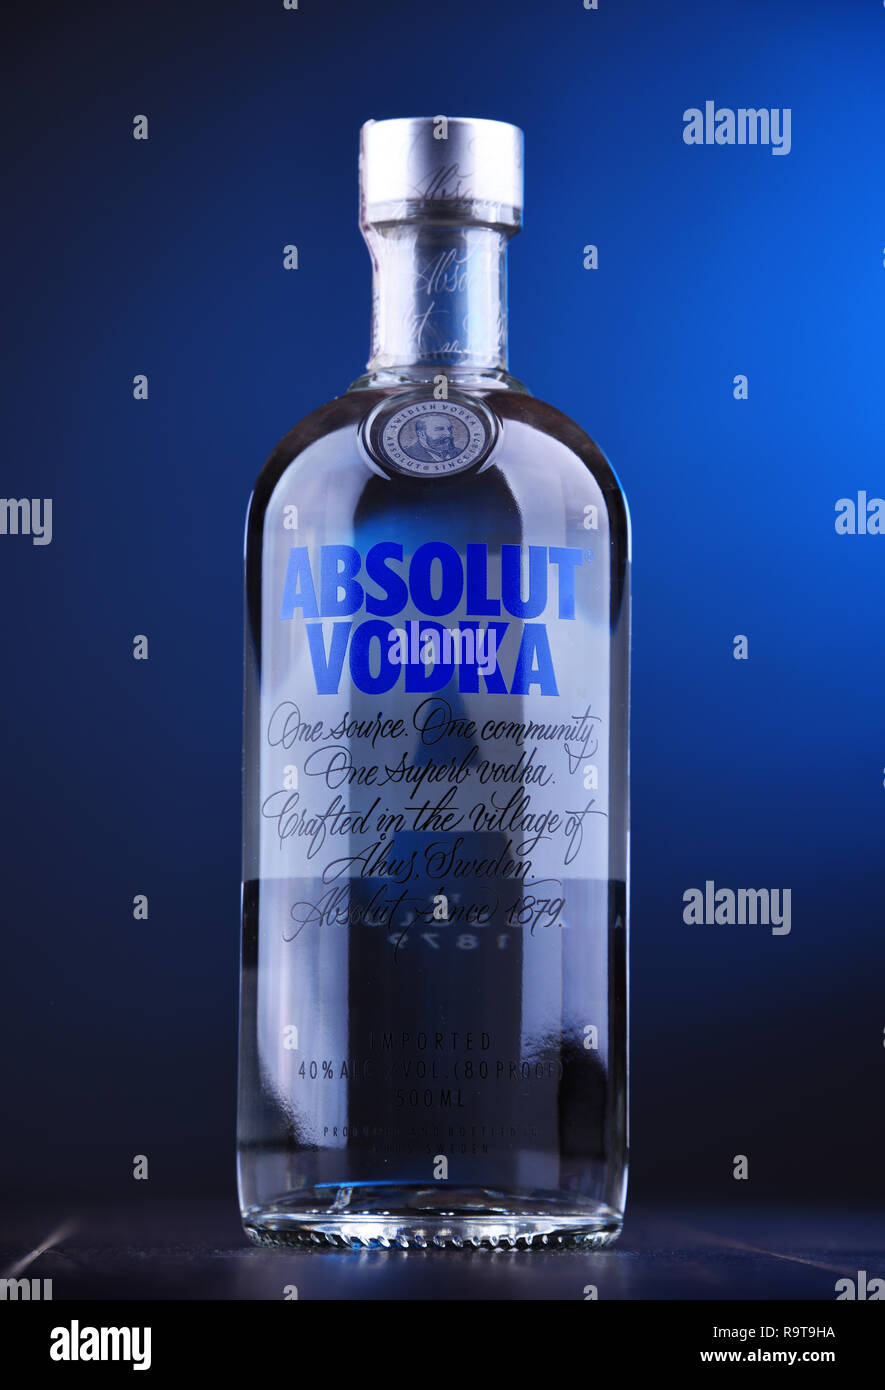 POZNAN, POL - NOV 29, 2018: Bottle of Absolut Vodka, a brand of vodka  produced in Sweden. Owned by French group Pernod Ricard it is one of the  largest Stock Photo - Alamy